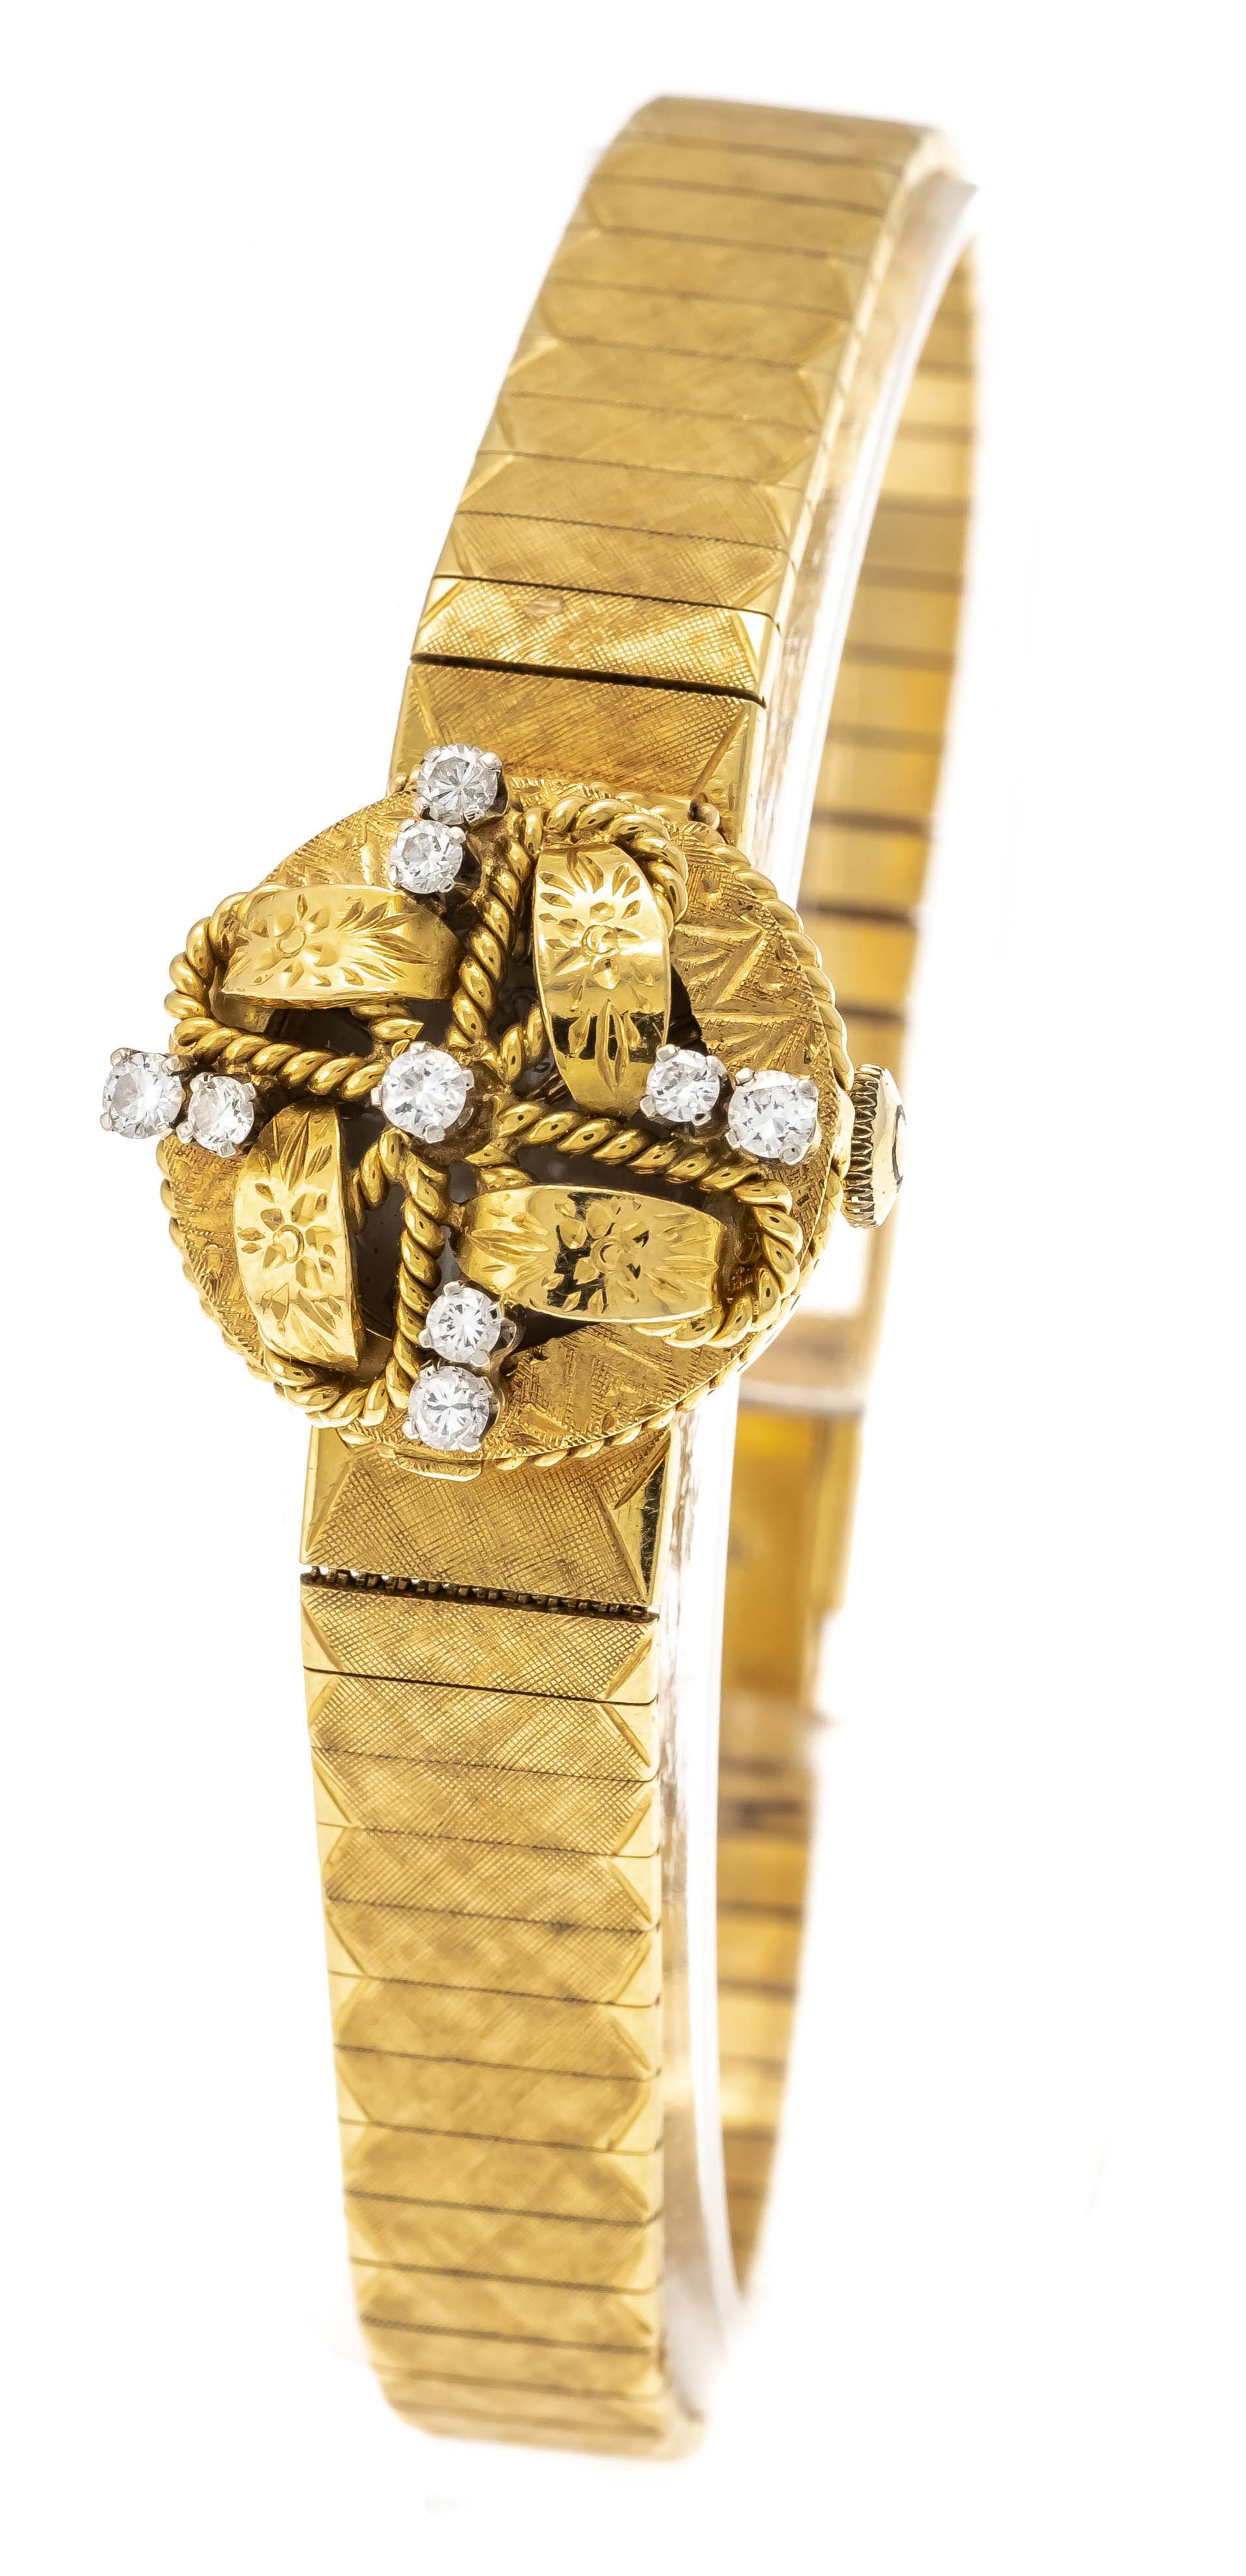 Omega ladies' watch, GG 750/000, jewellery cover with brilliant-cut diamonds in a diamond-setting - Image 4 of 9